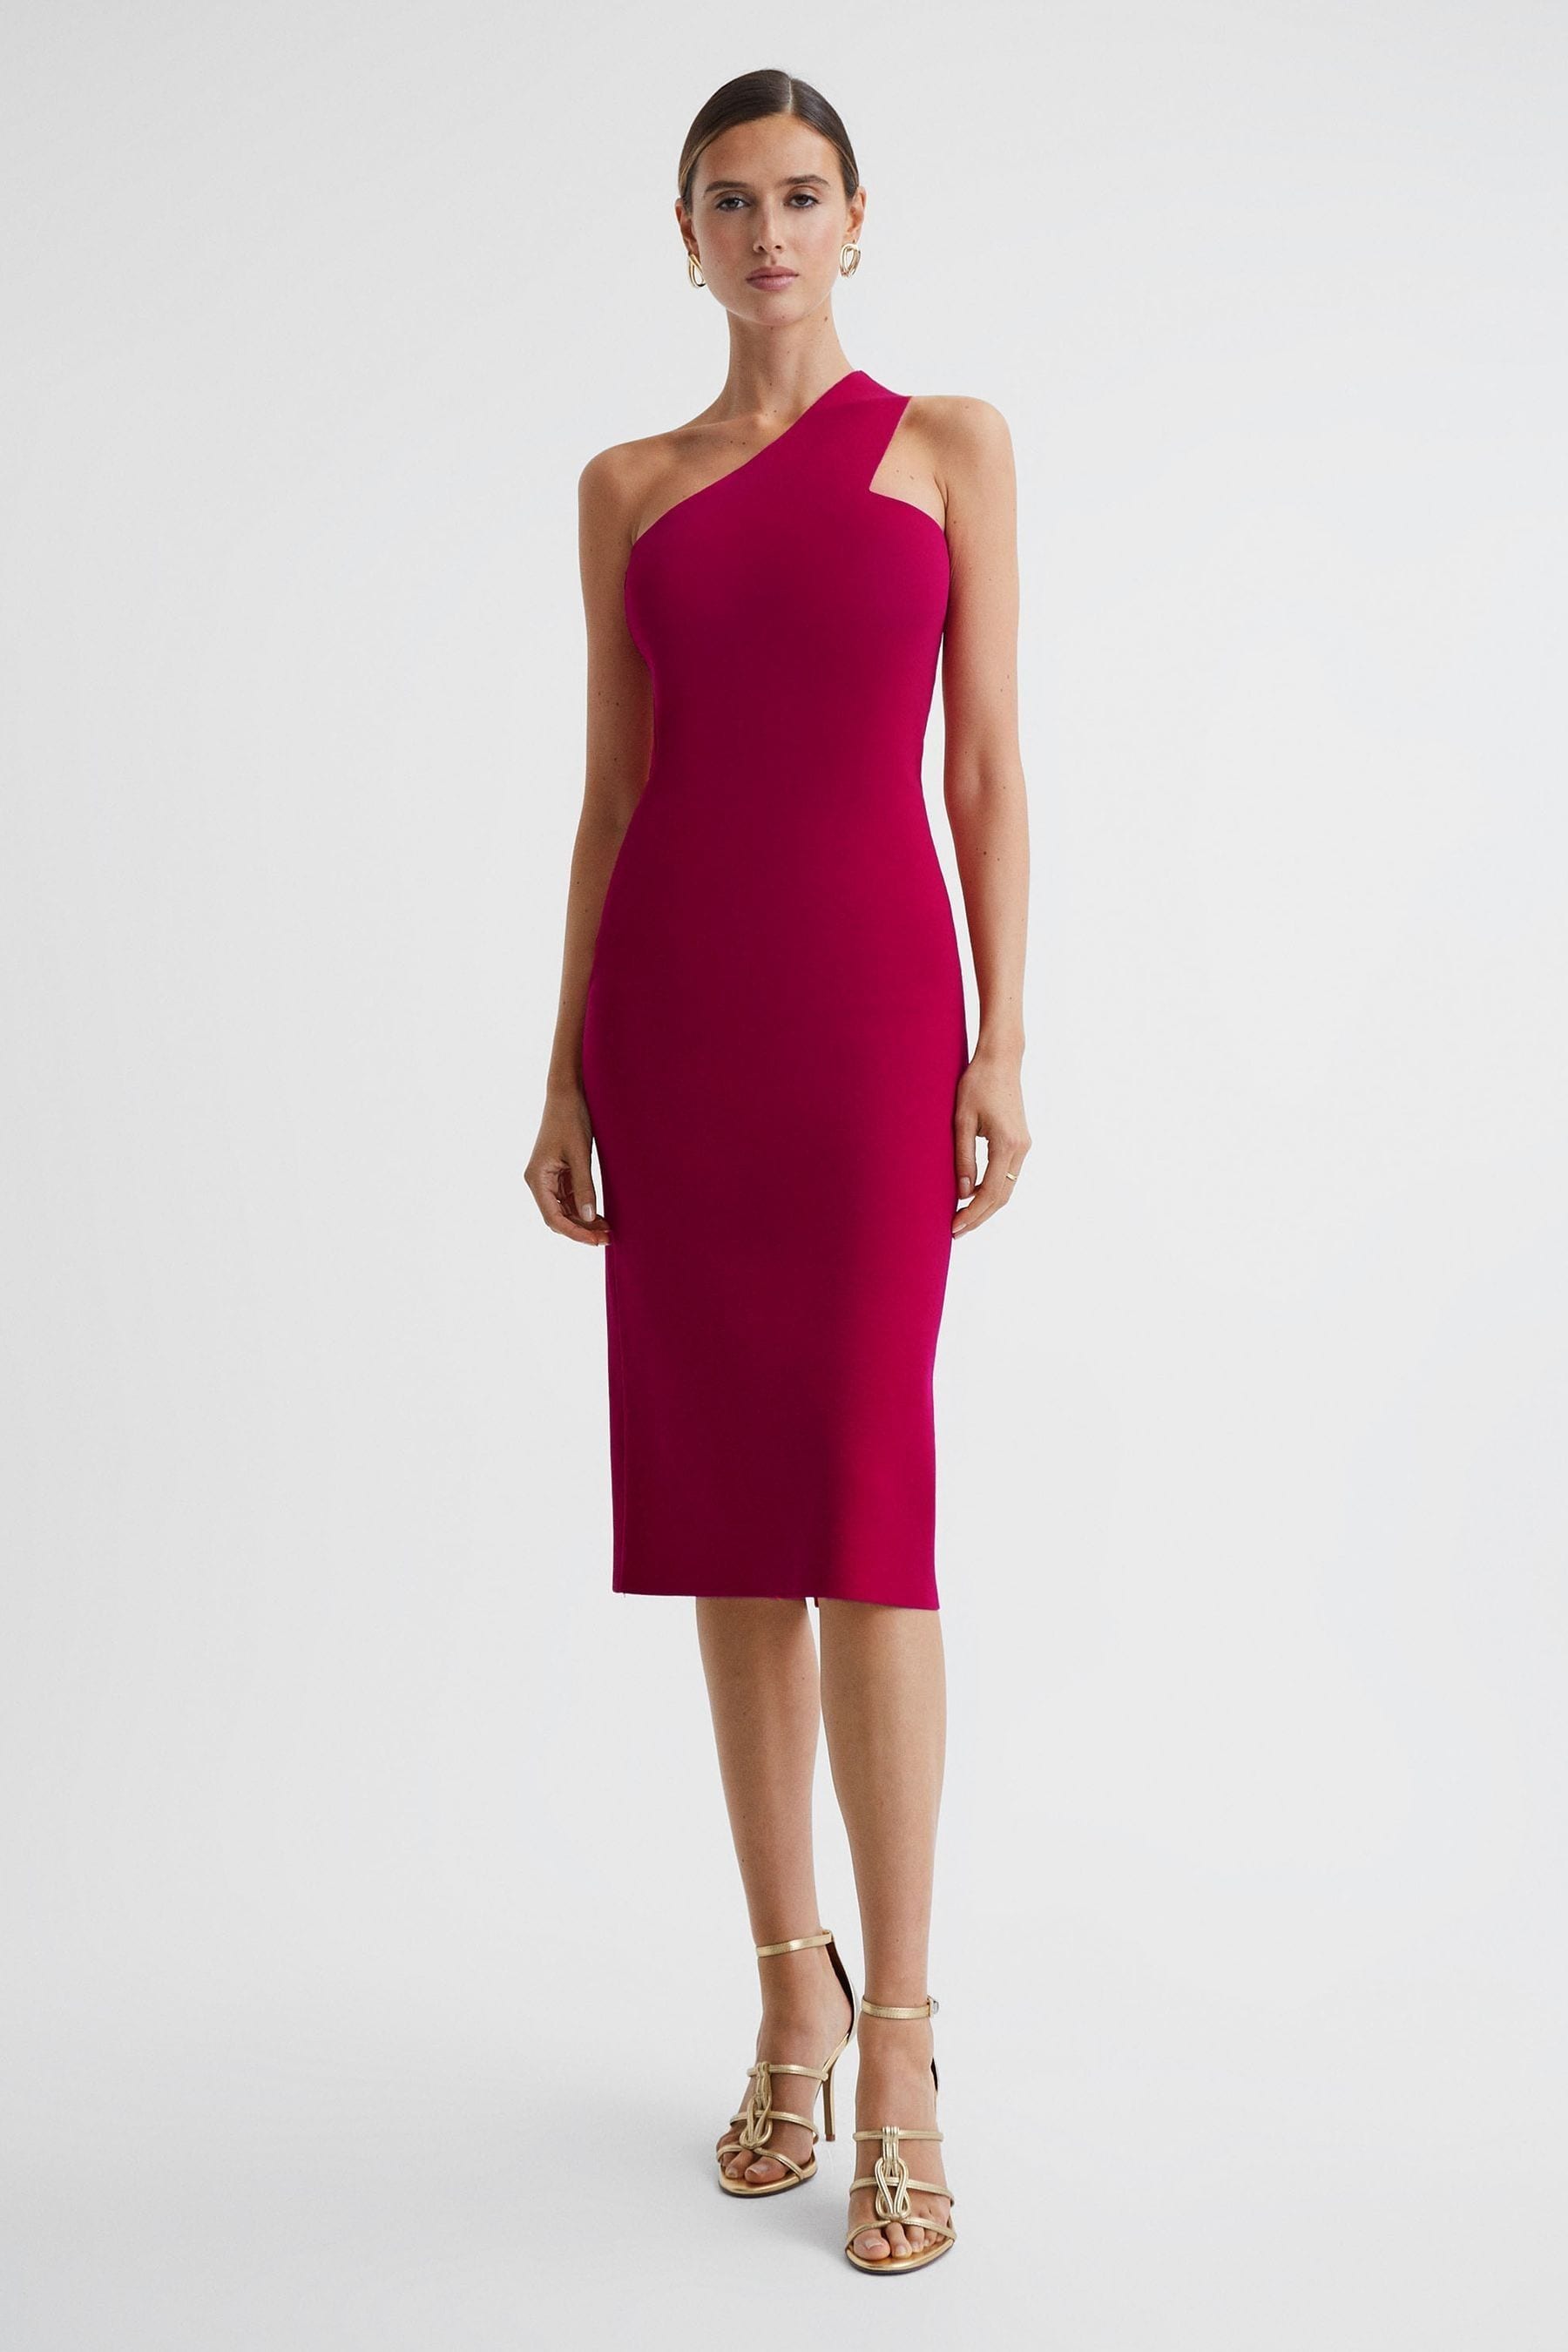 Reiss Lola - Pink Knitted One Shoulder Bodycon Midi Dress, L